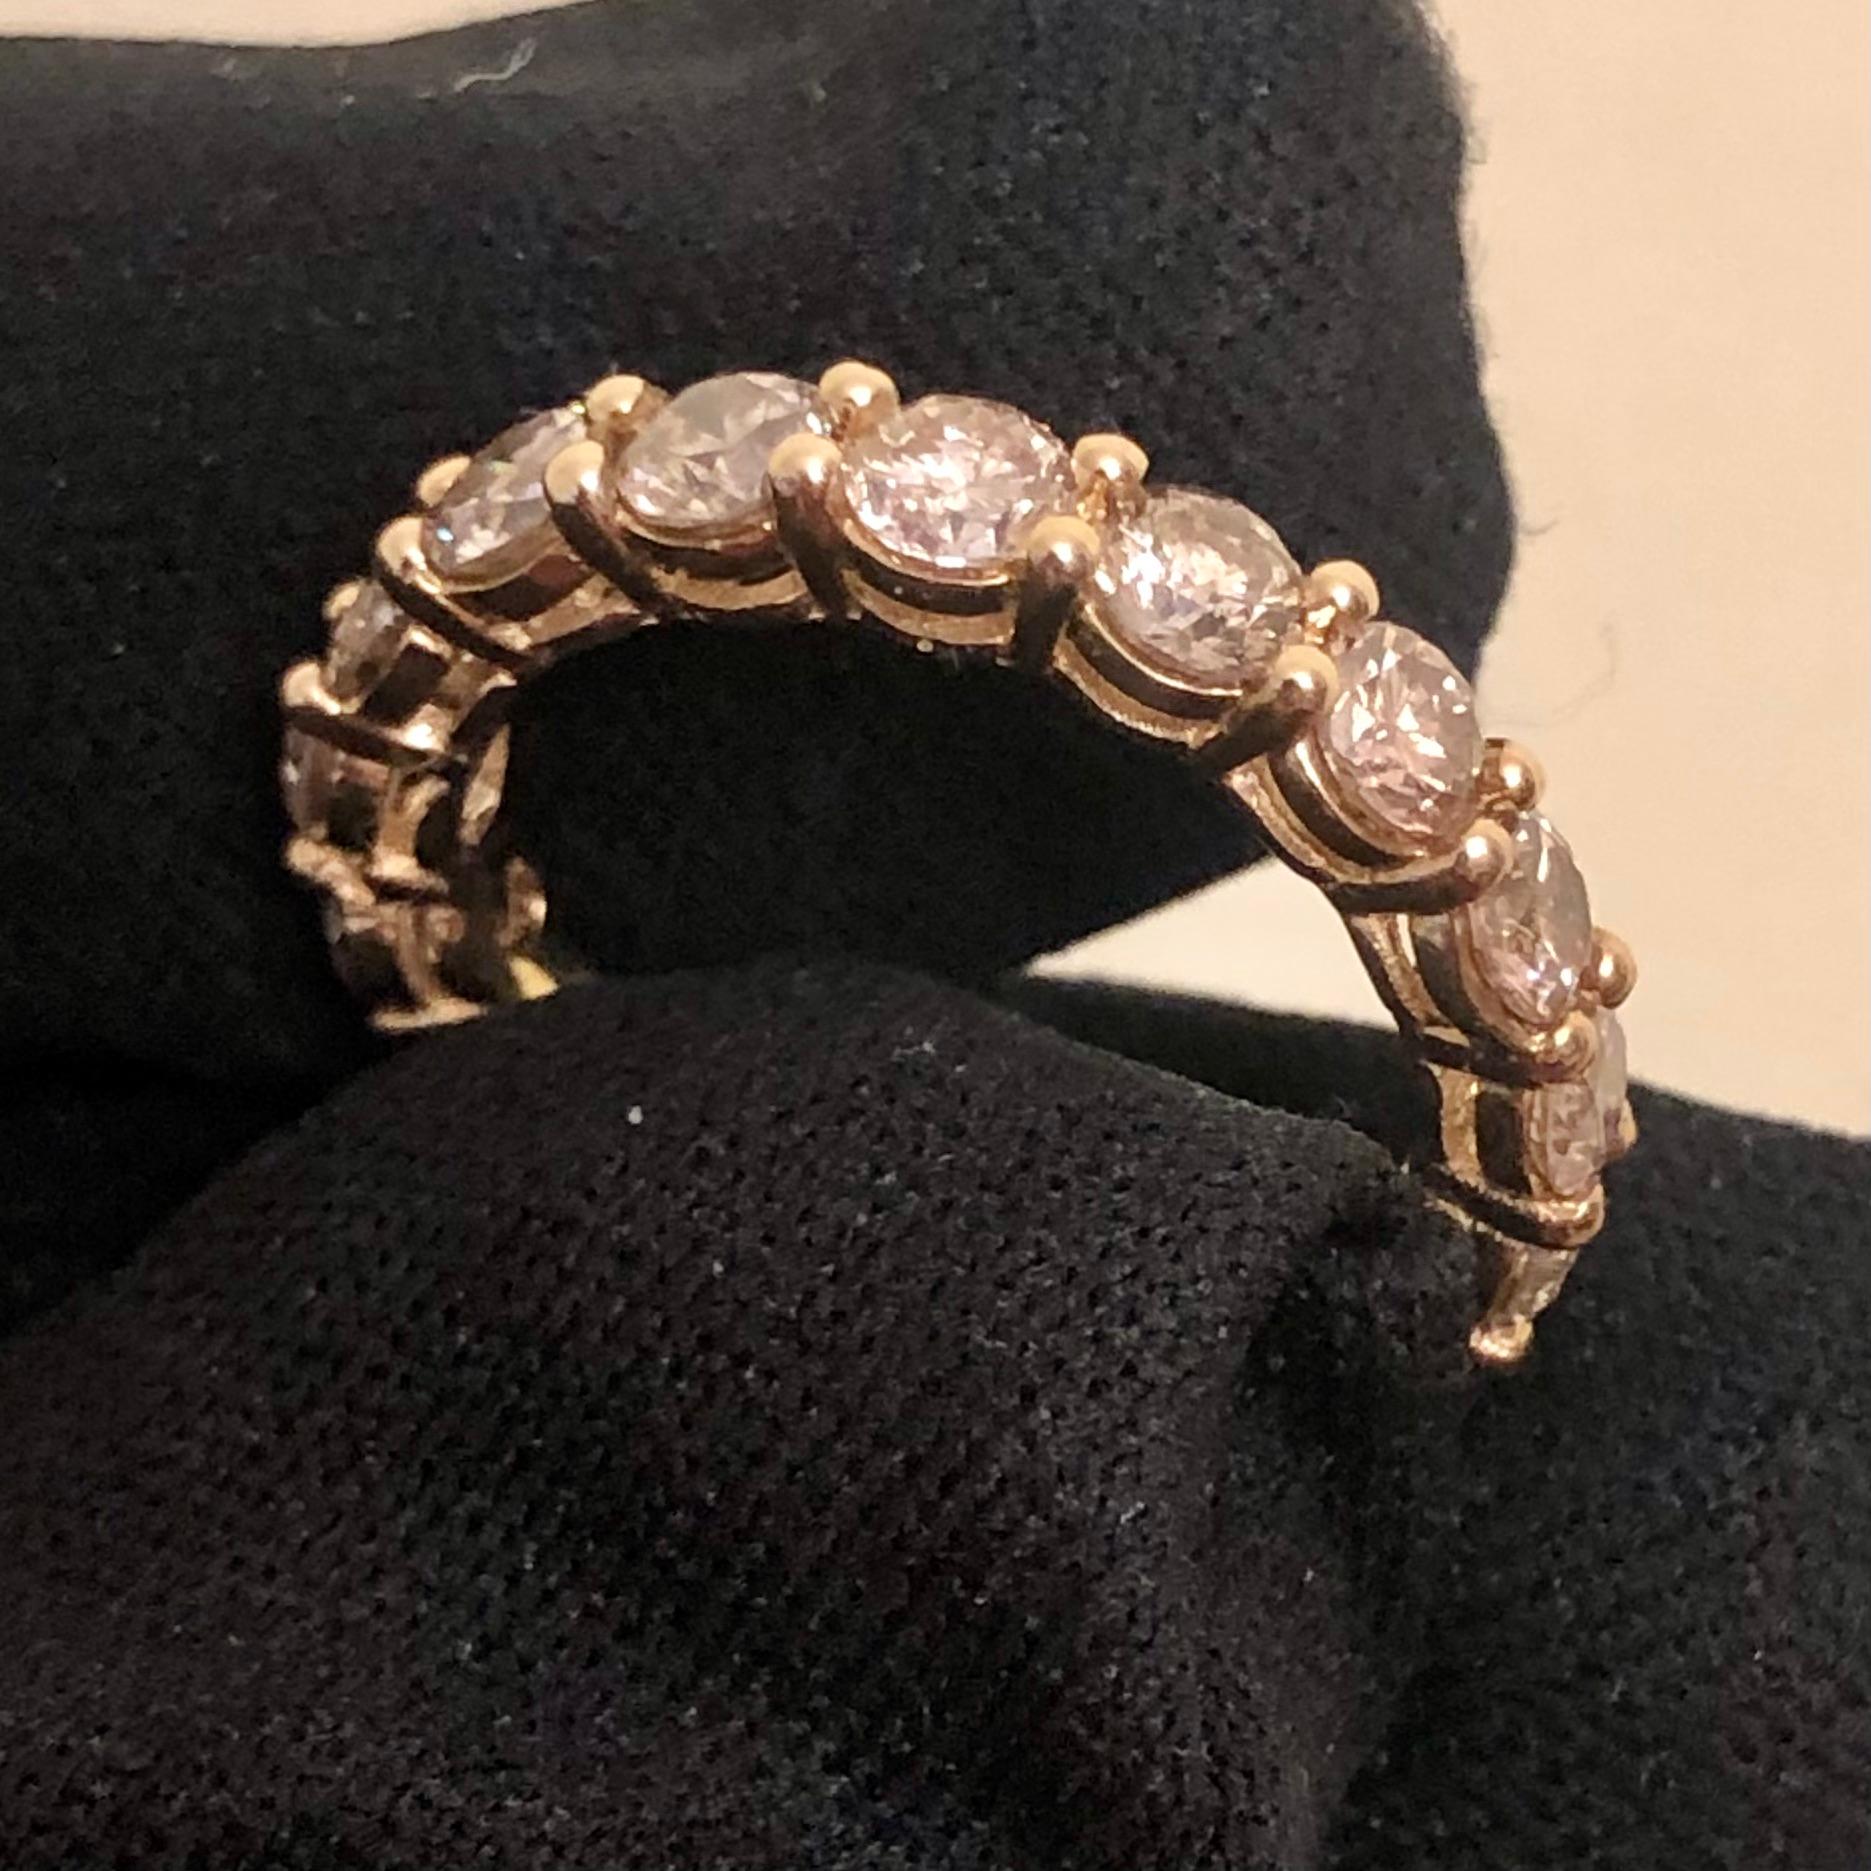 Stunning 3 1/2 carat round diamond full eternity band ring in 14k yellow gold. 17 round SI-I clarity solitaire diamonds are hand set in this full eternity band weighing approx. 3.53 carats. 


17 natural 1/5 carat solitaire earth-mined diamonds are